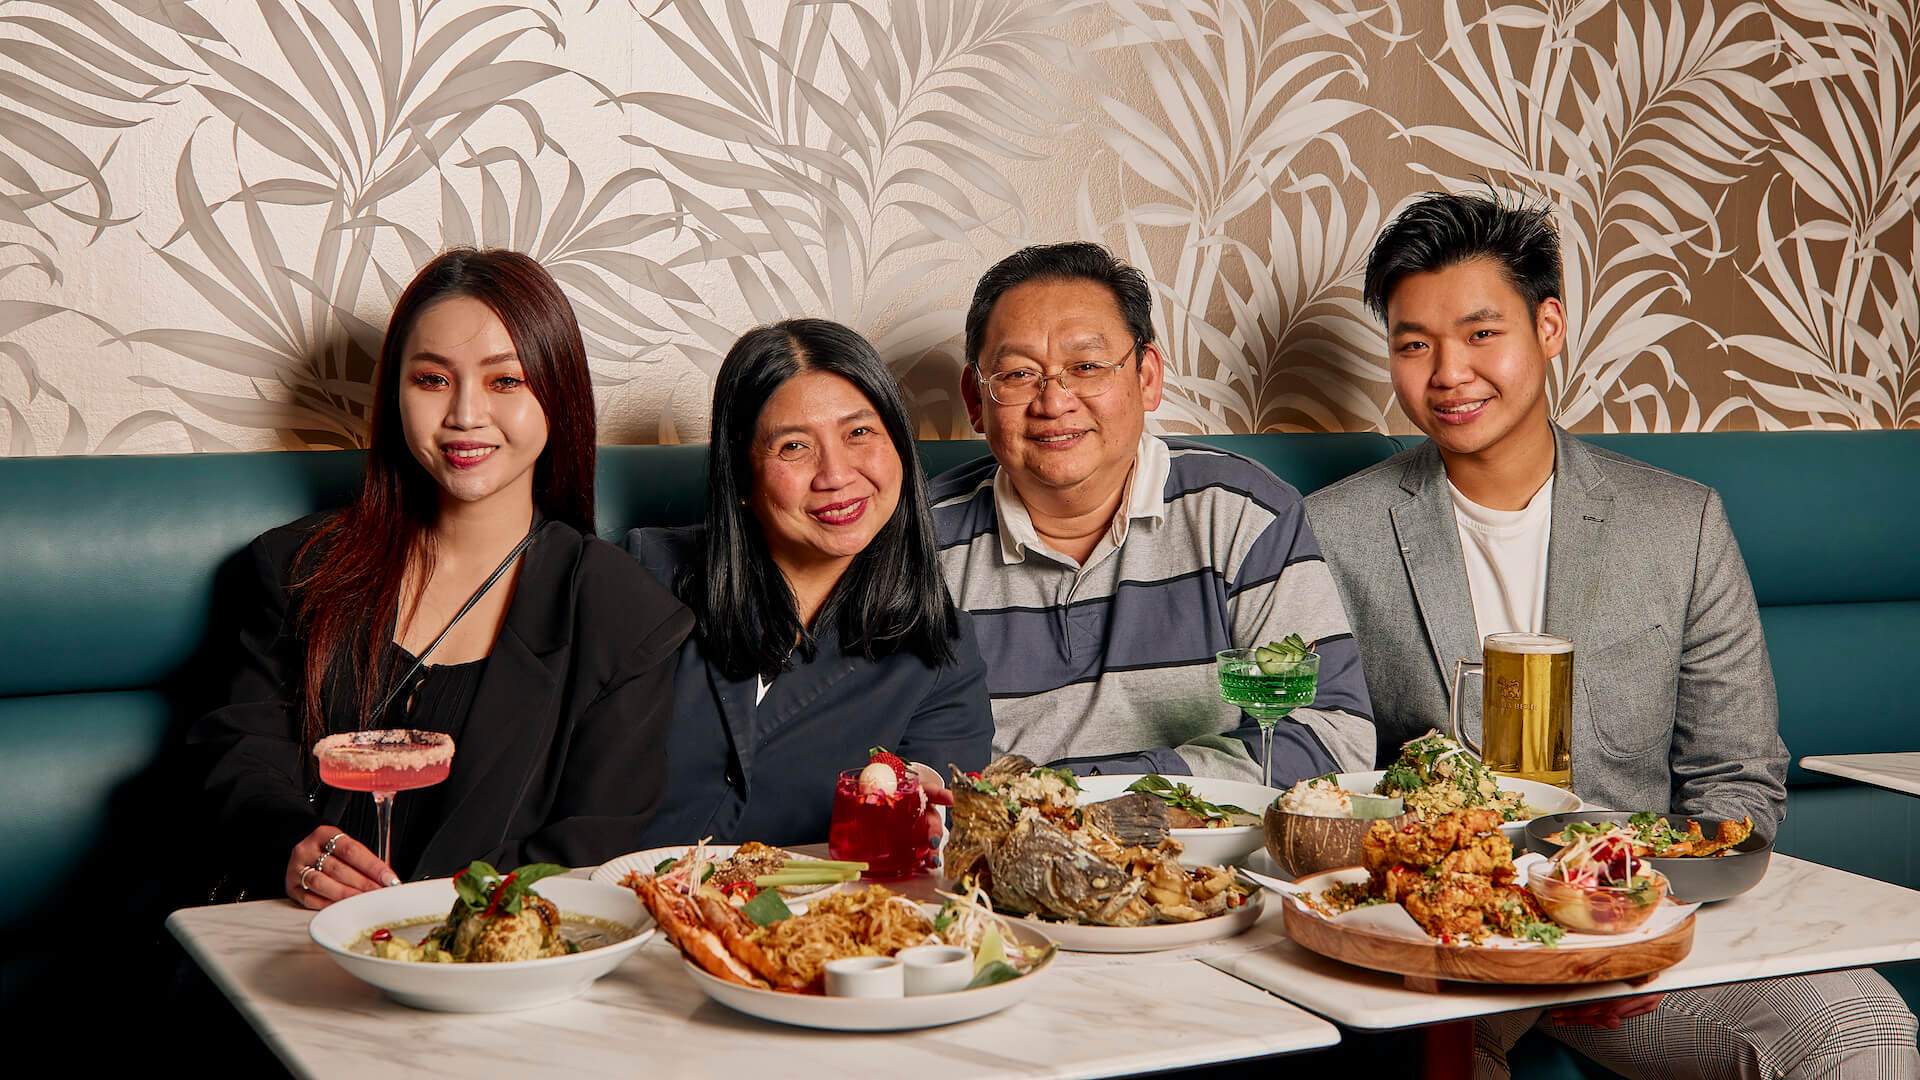 The Pongvattanaporn family - owners of Kan Eang. A Thai restaurant in Melbourne